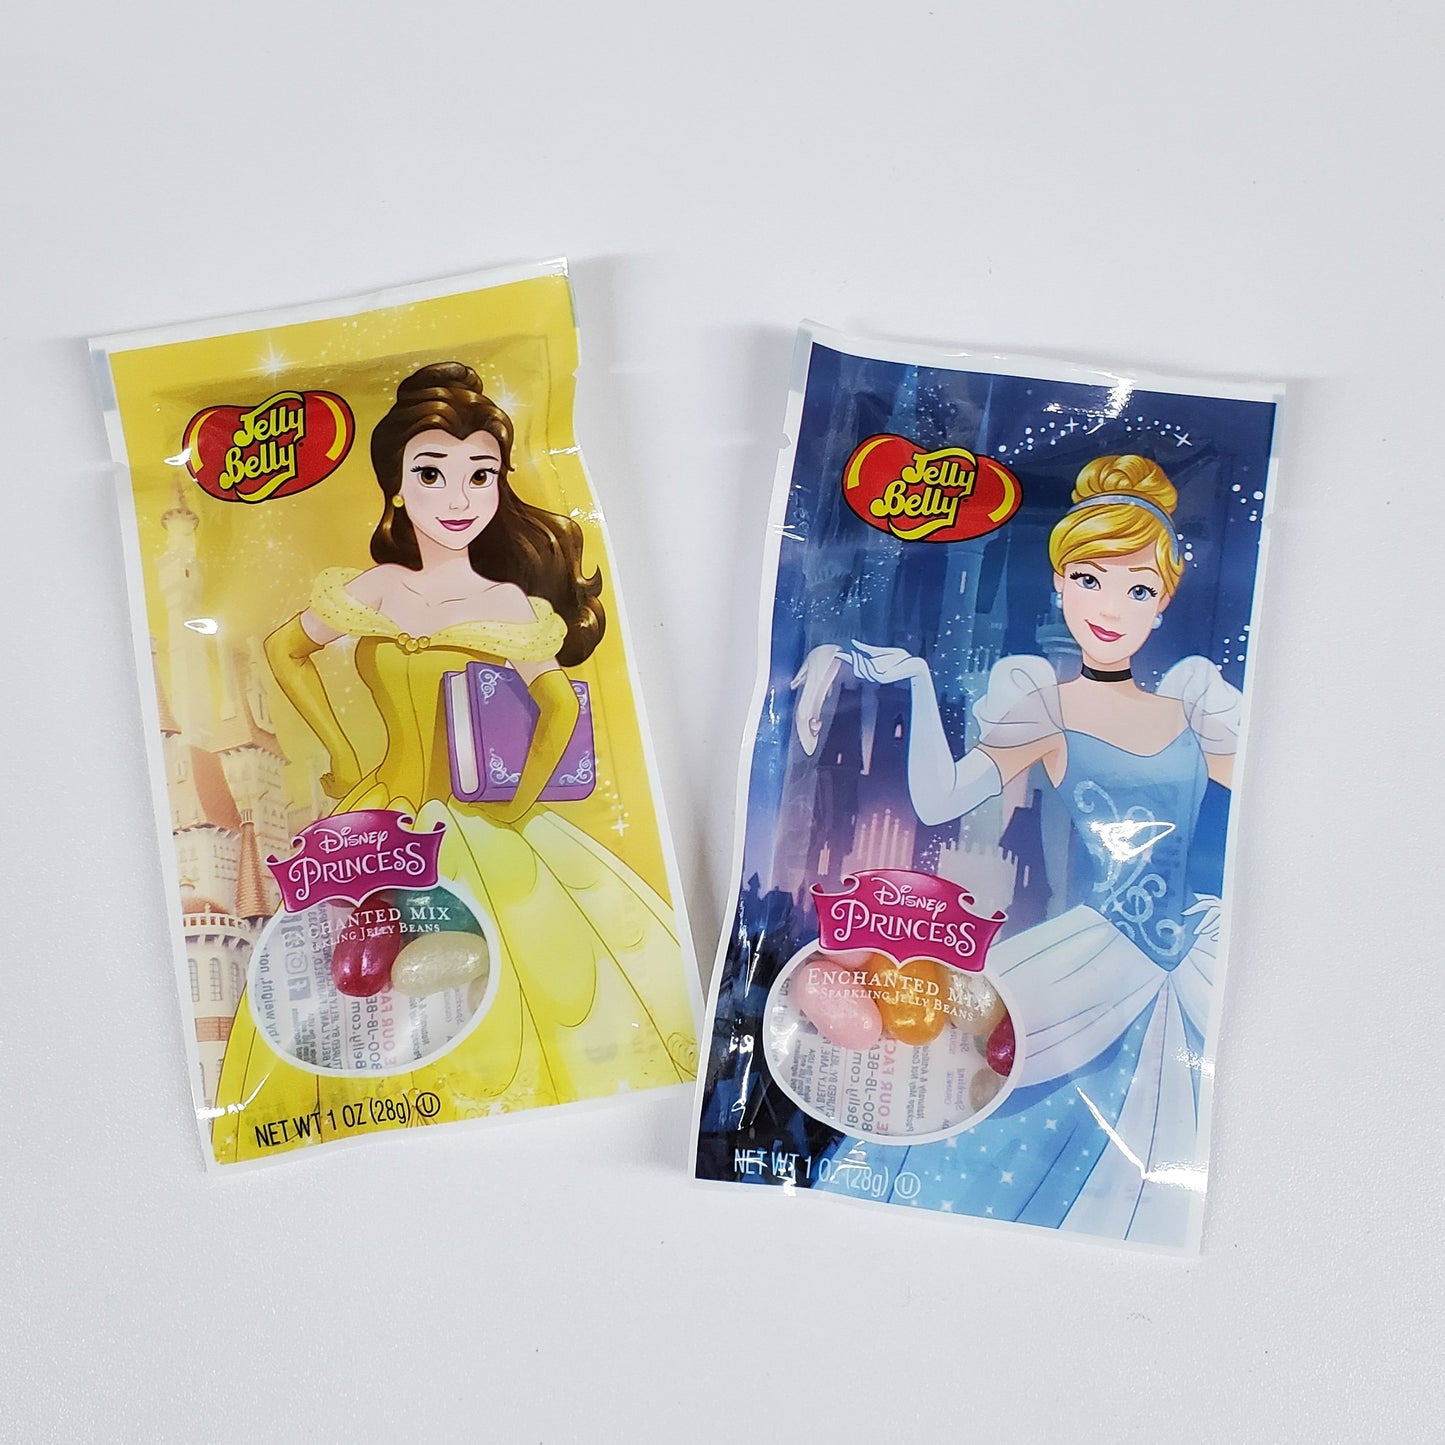 1oz Jelly Belly Jelly Beans Packages with Disney Princess images